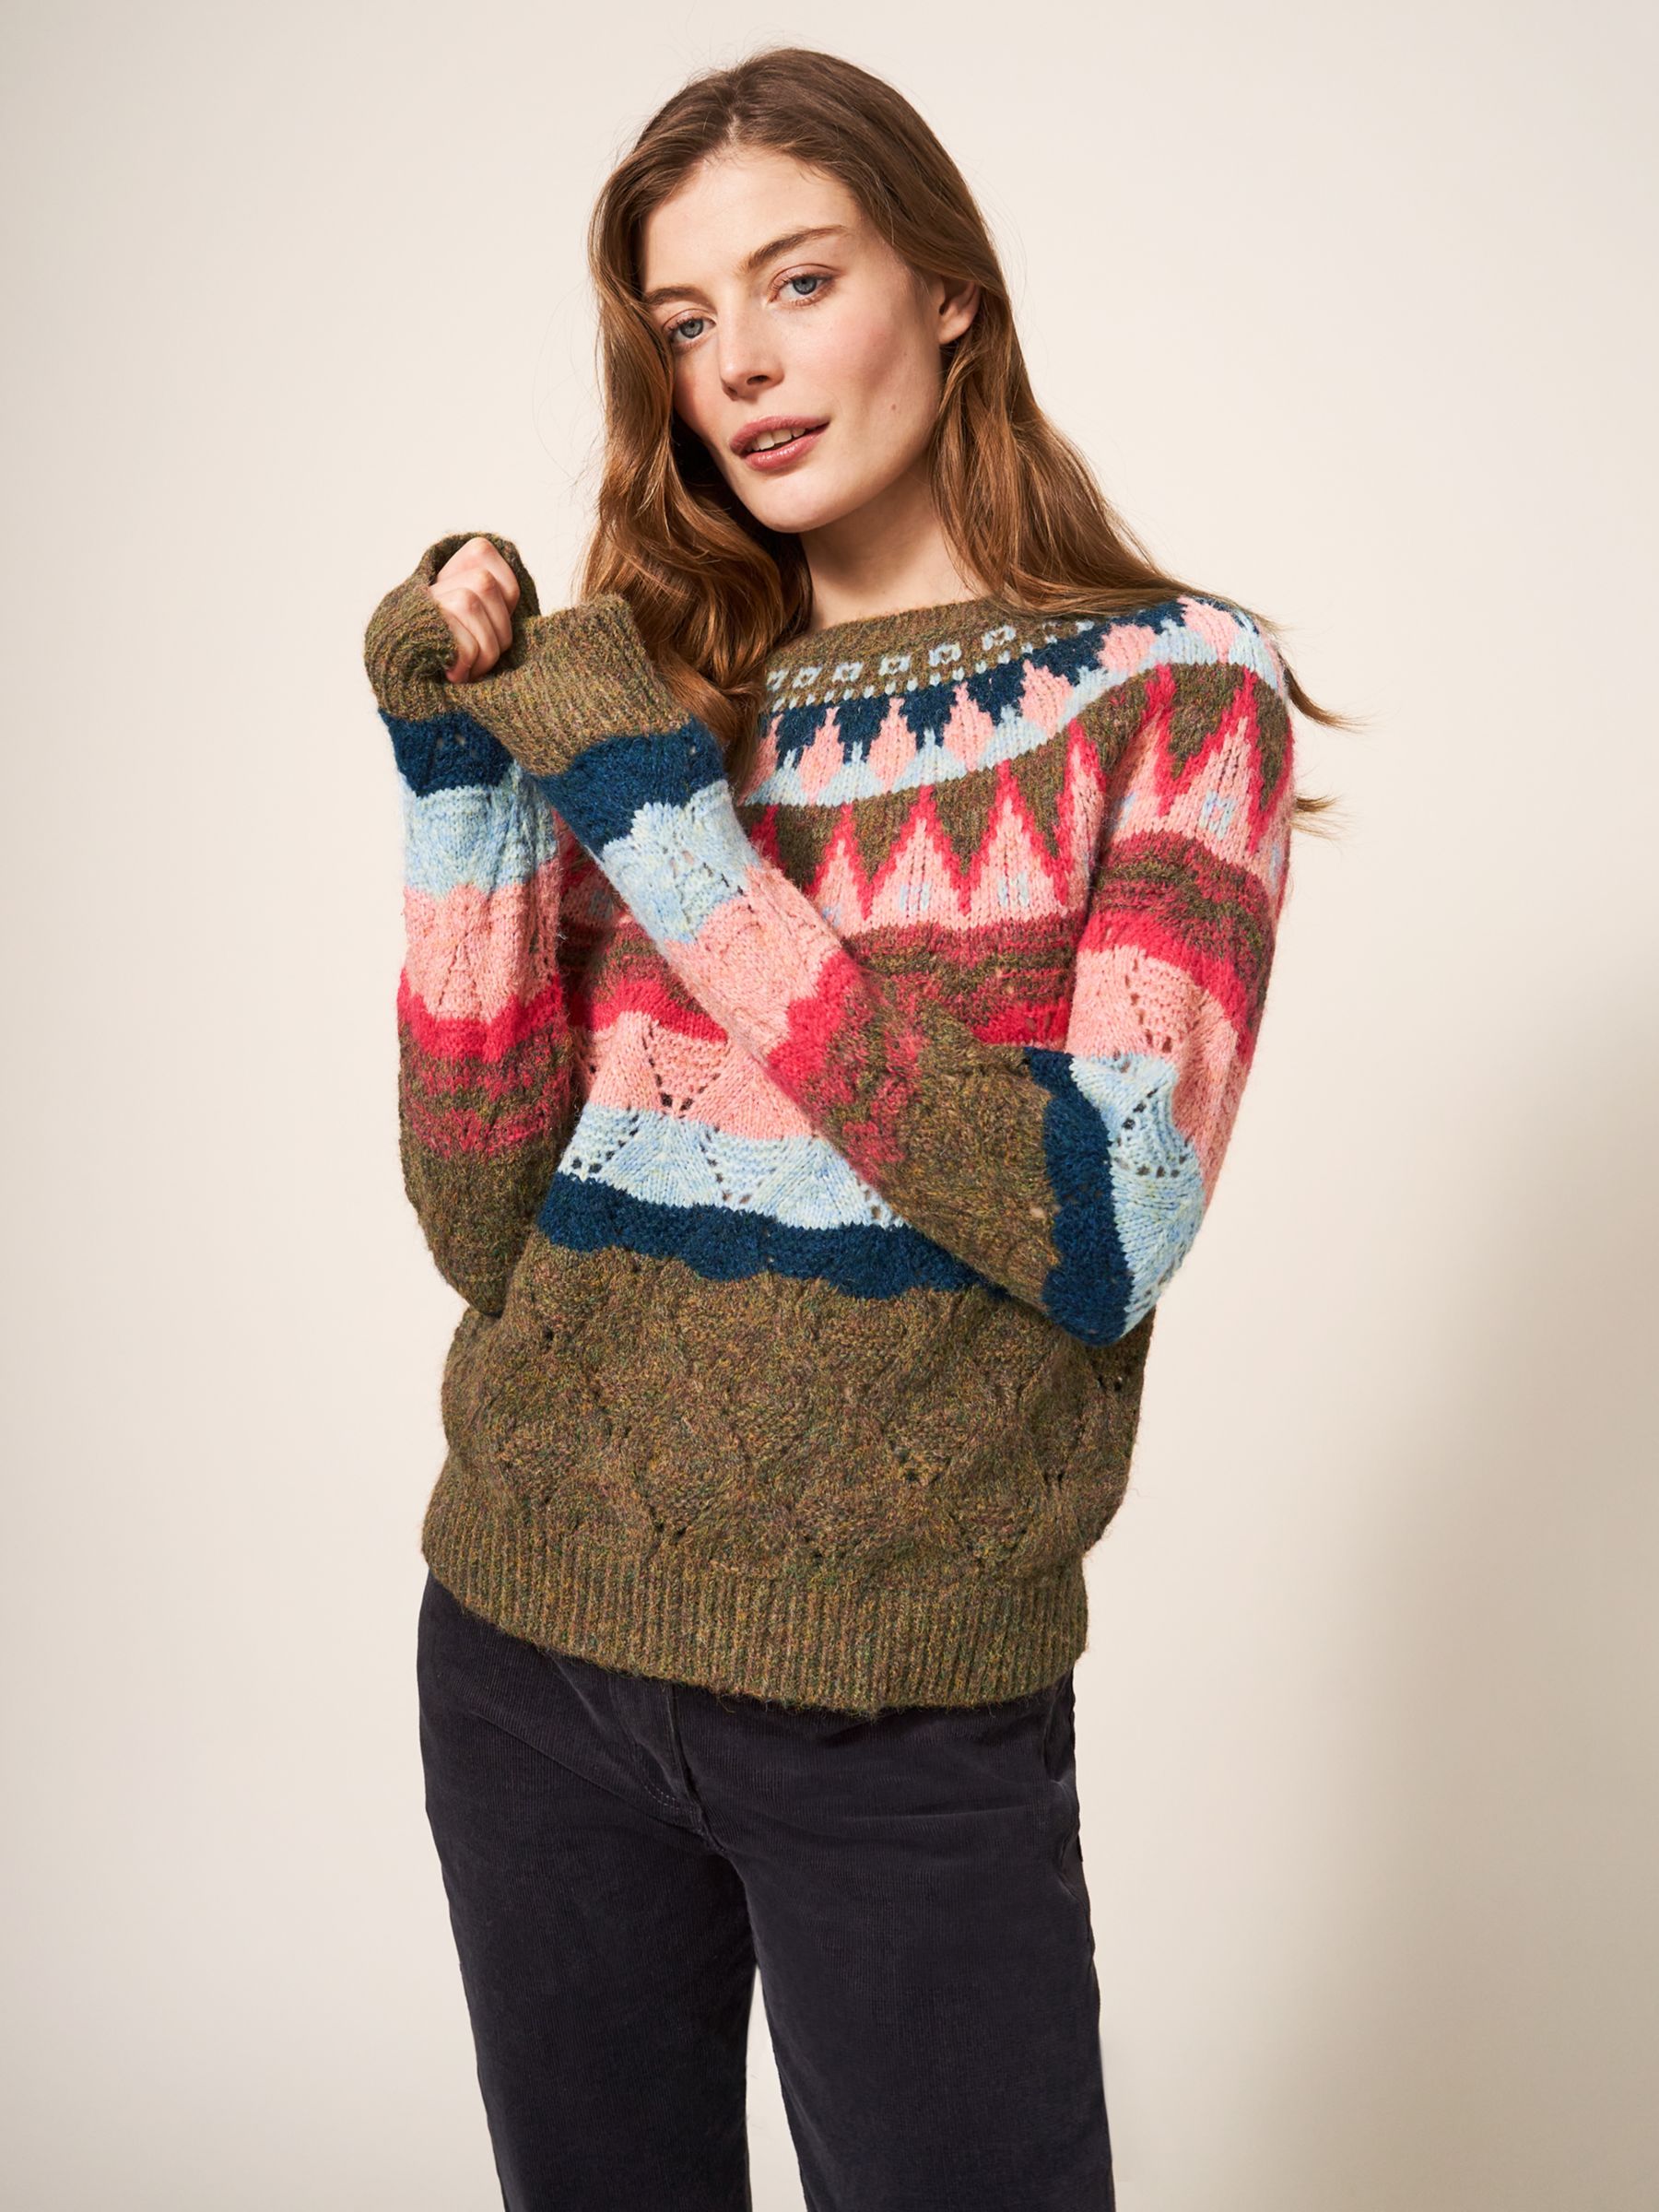 Women's Knit Tops, Jumpers & Sweaters